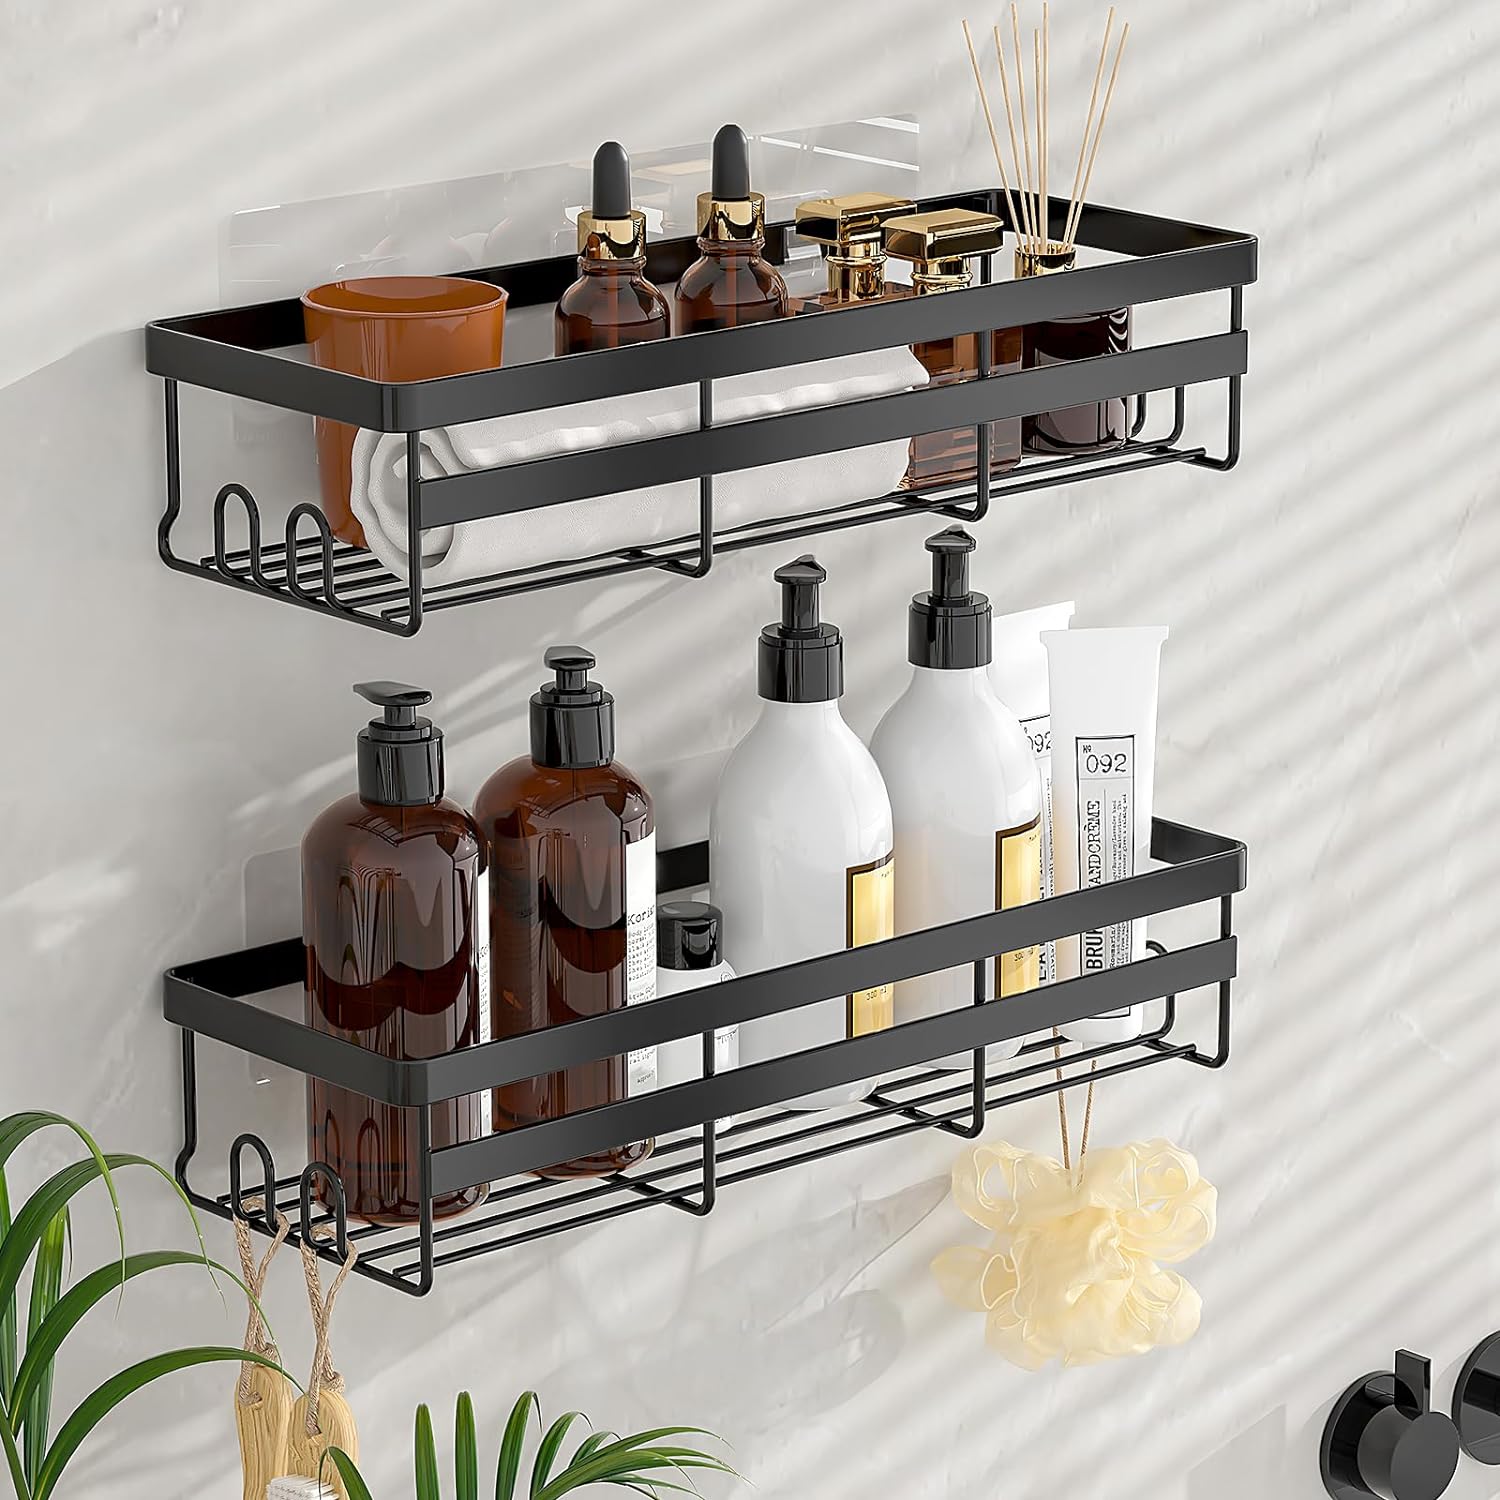 Wowbox Adhesive Shower Caddy Shelf, 2 Pack - Hanging Bathroom Organizer, No Drilling Stainless Black Shelves For Storage  Home Decor